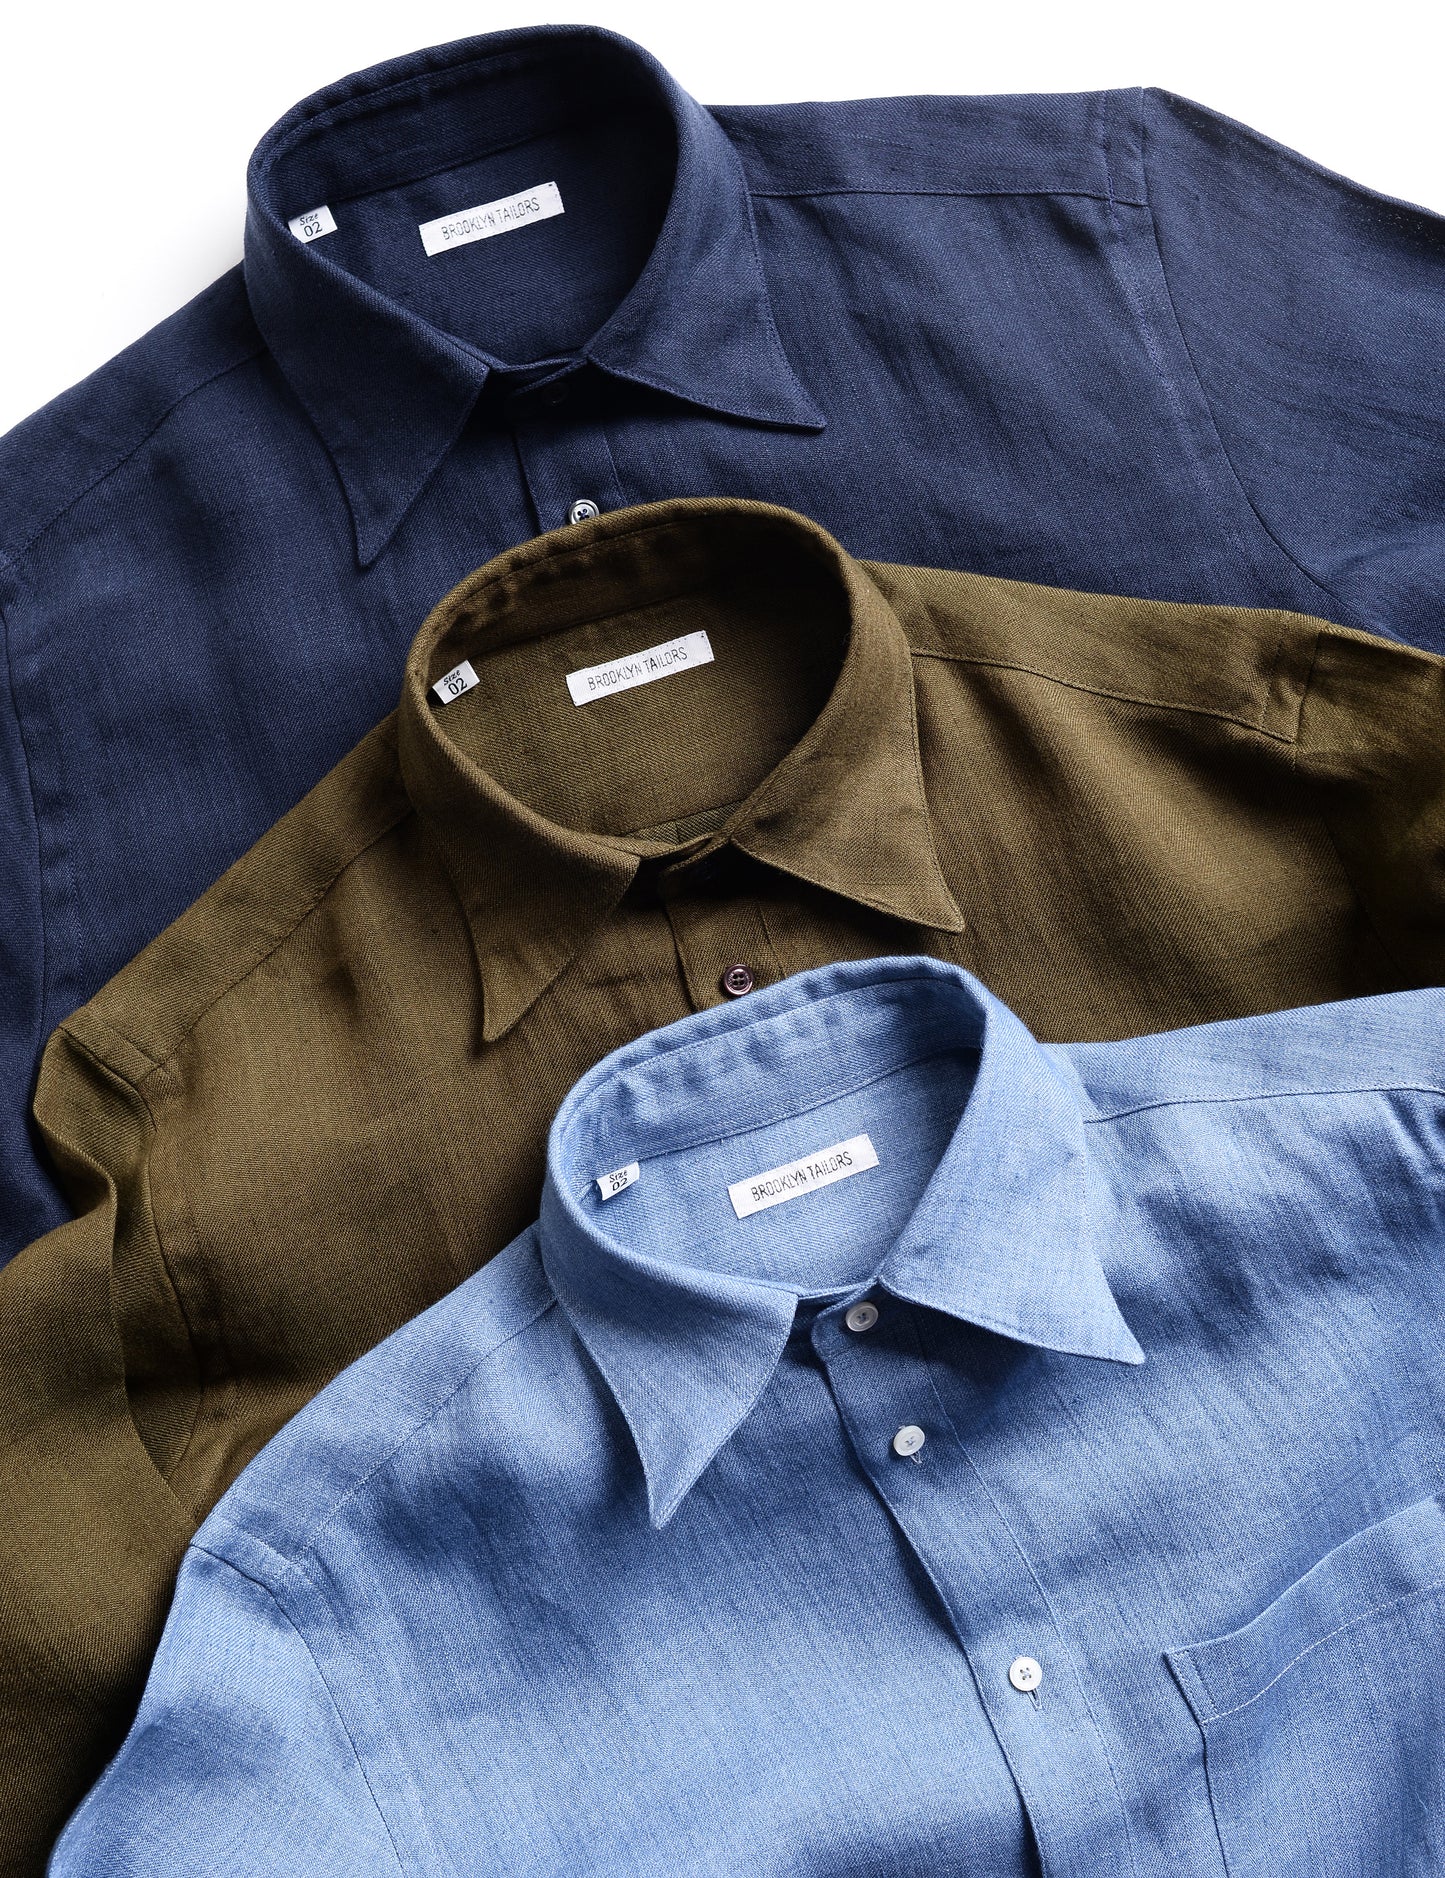 BKT14 Relaxed Casual Shirt in Linen Twill - Salerno Blue